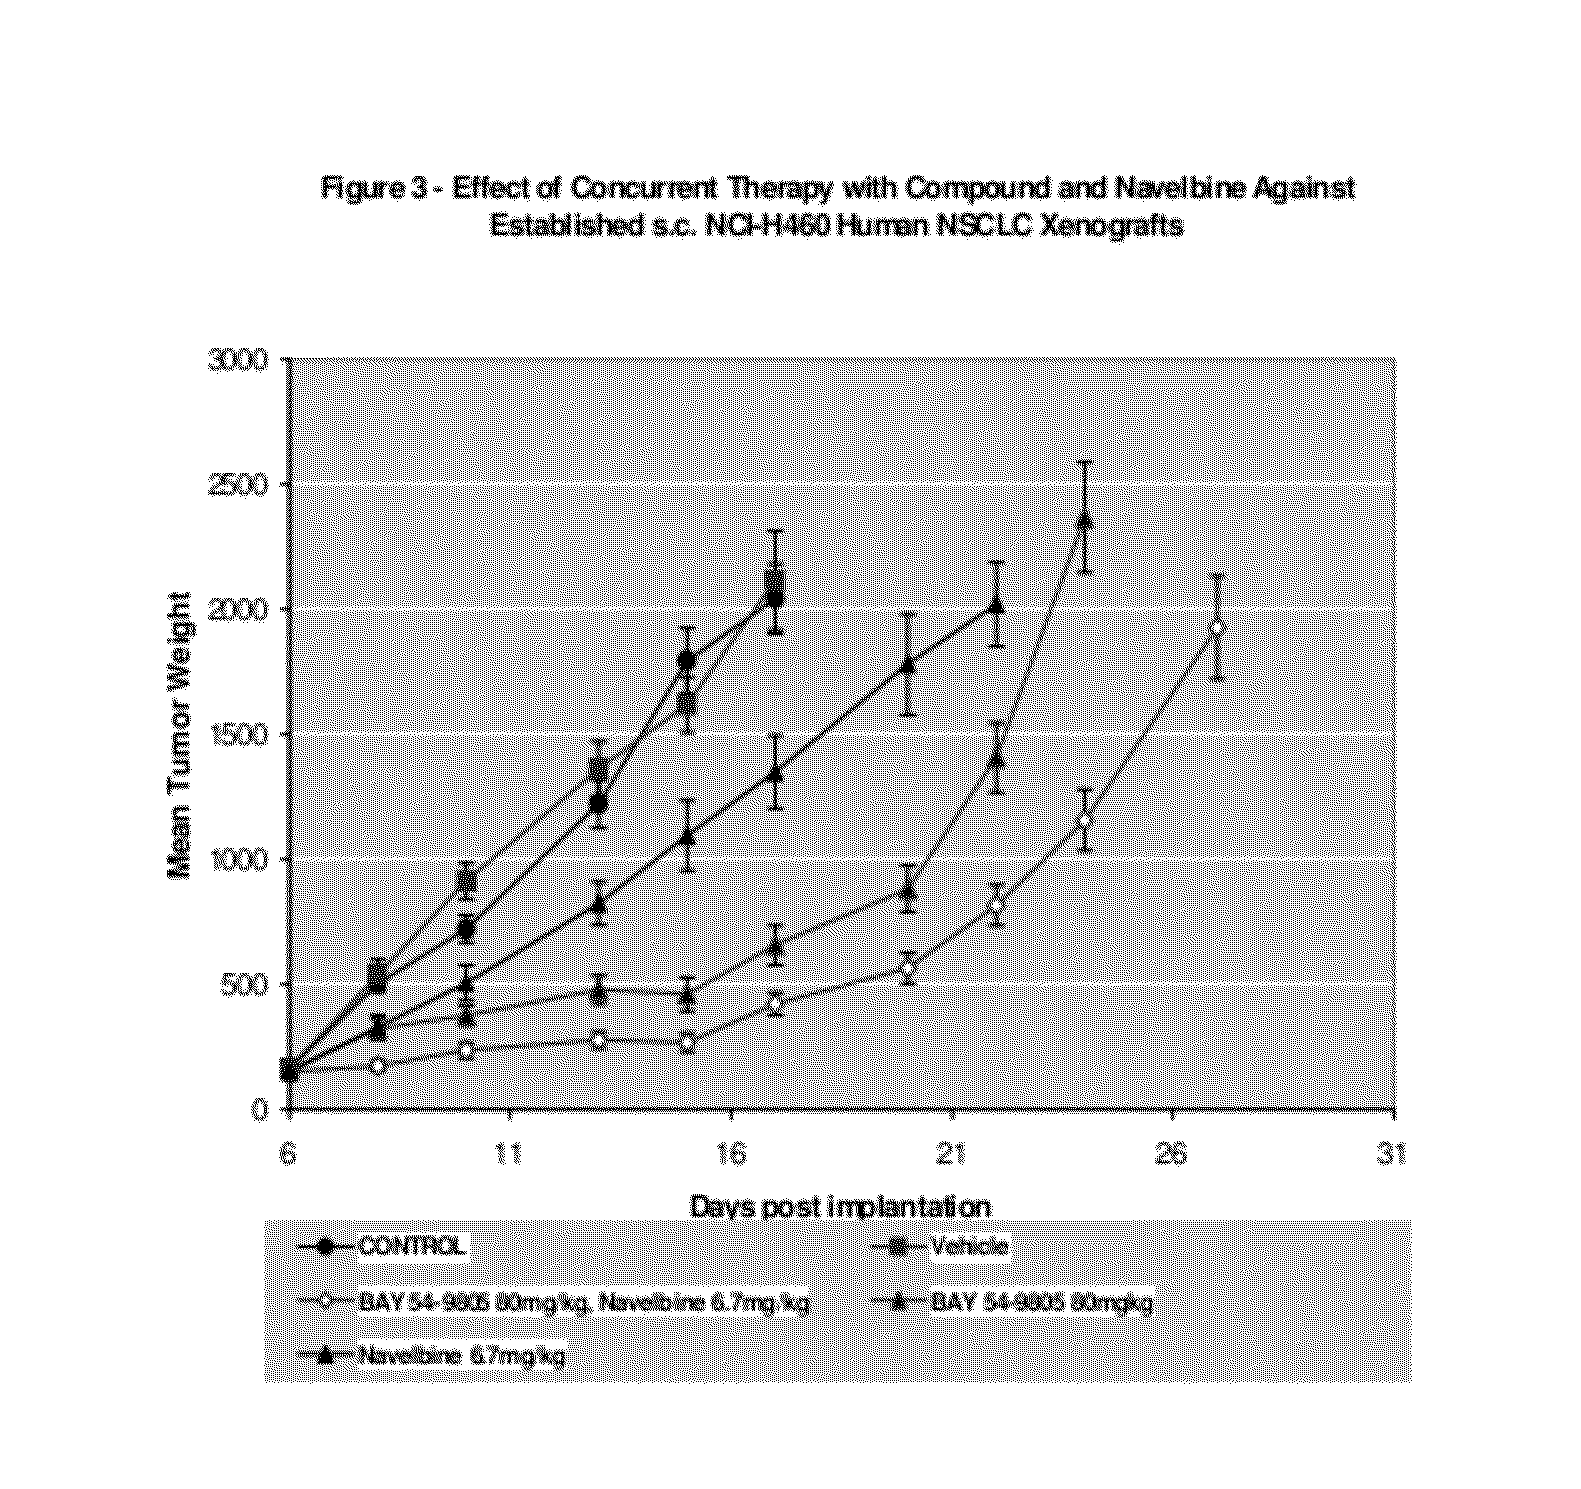 Aryl urea compounds in combination with other cytostatic or cytotoxic agents for treating human cancers